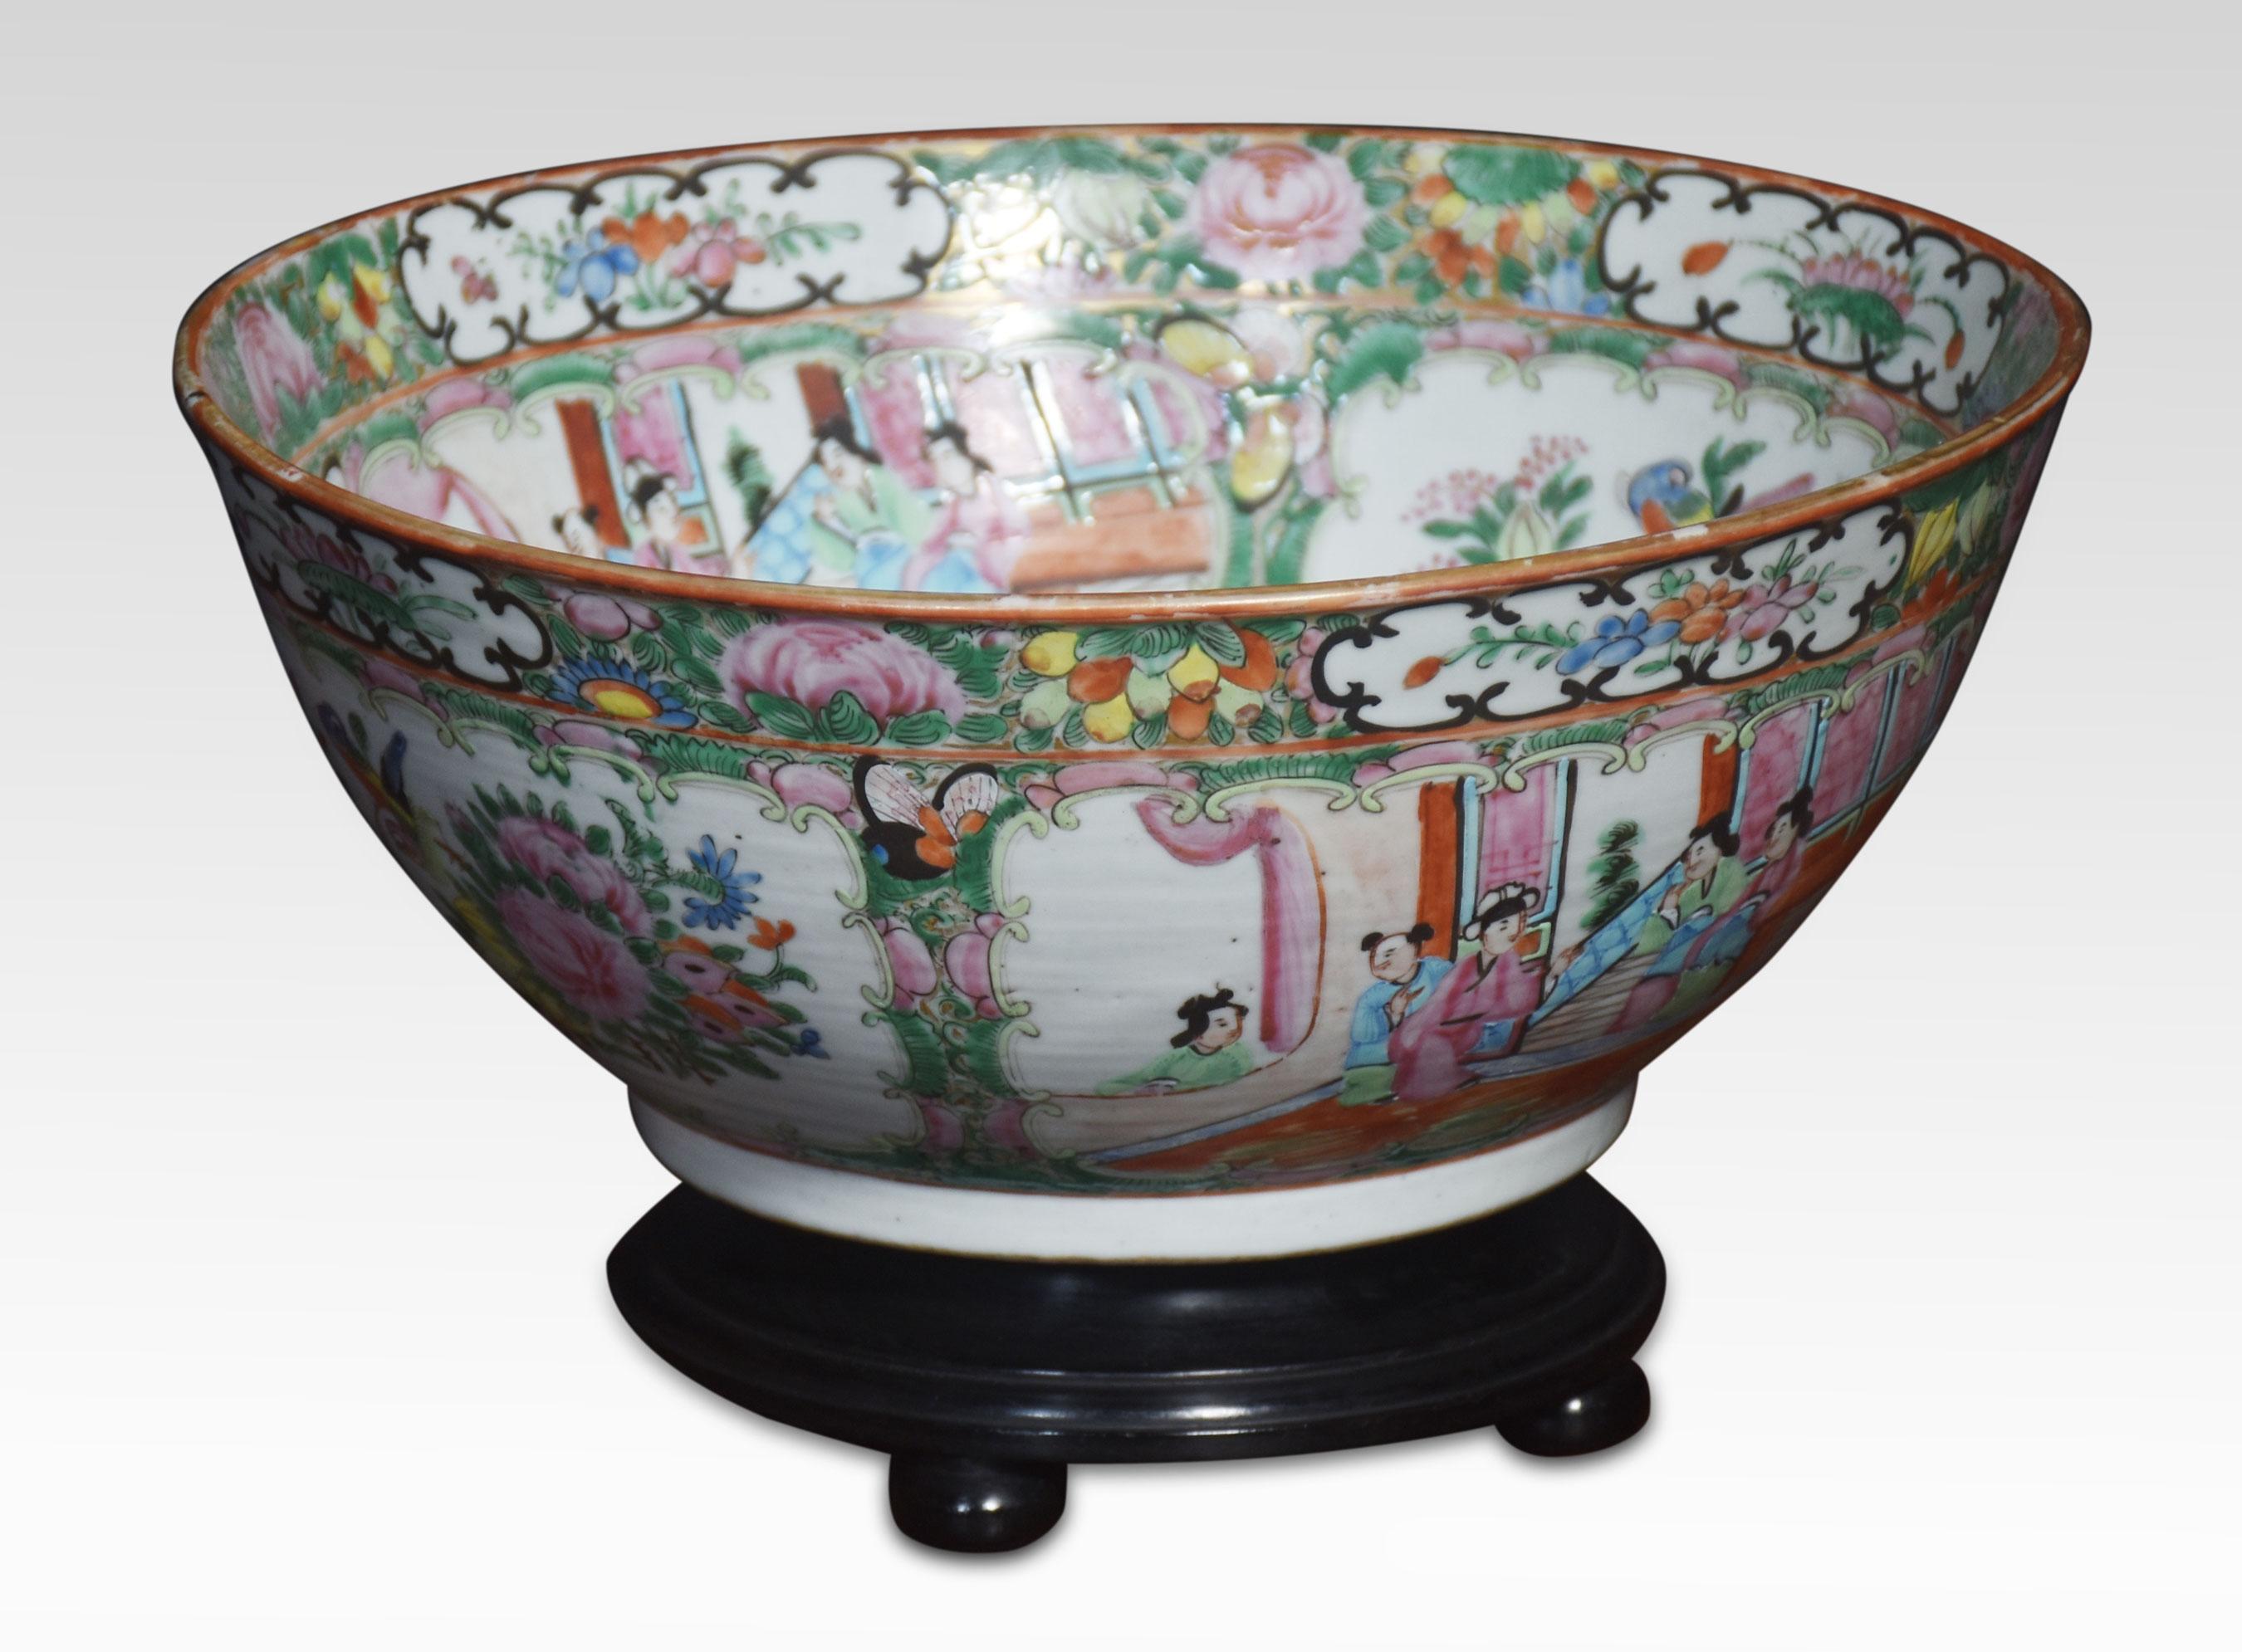 Late 19th-century Cantonese famille rose bowl, typically decorated in famille rose palette with panels of figures, flowers and birds. Raised on turned ebonies stand.
Dimensions
Height 7 Inches
Width 12 Inches
Depth 12 Inches